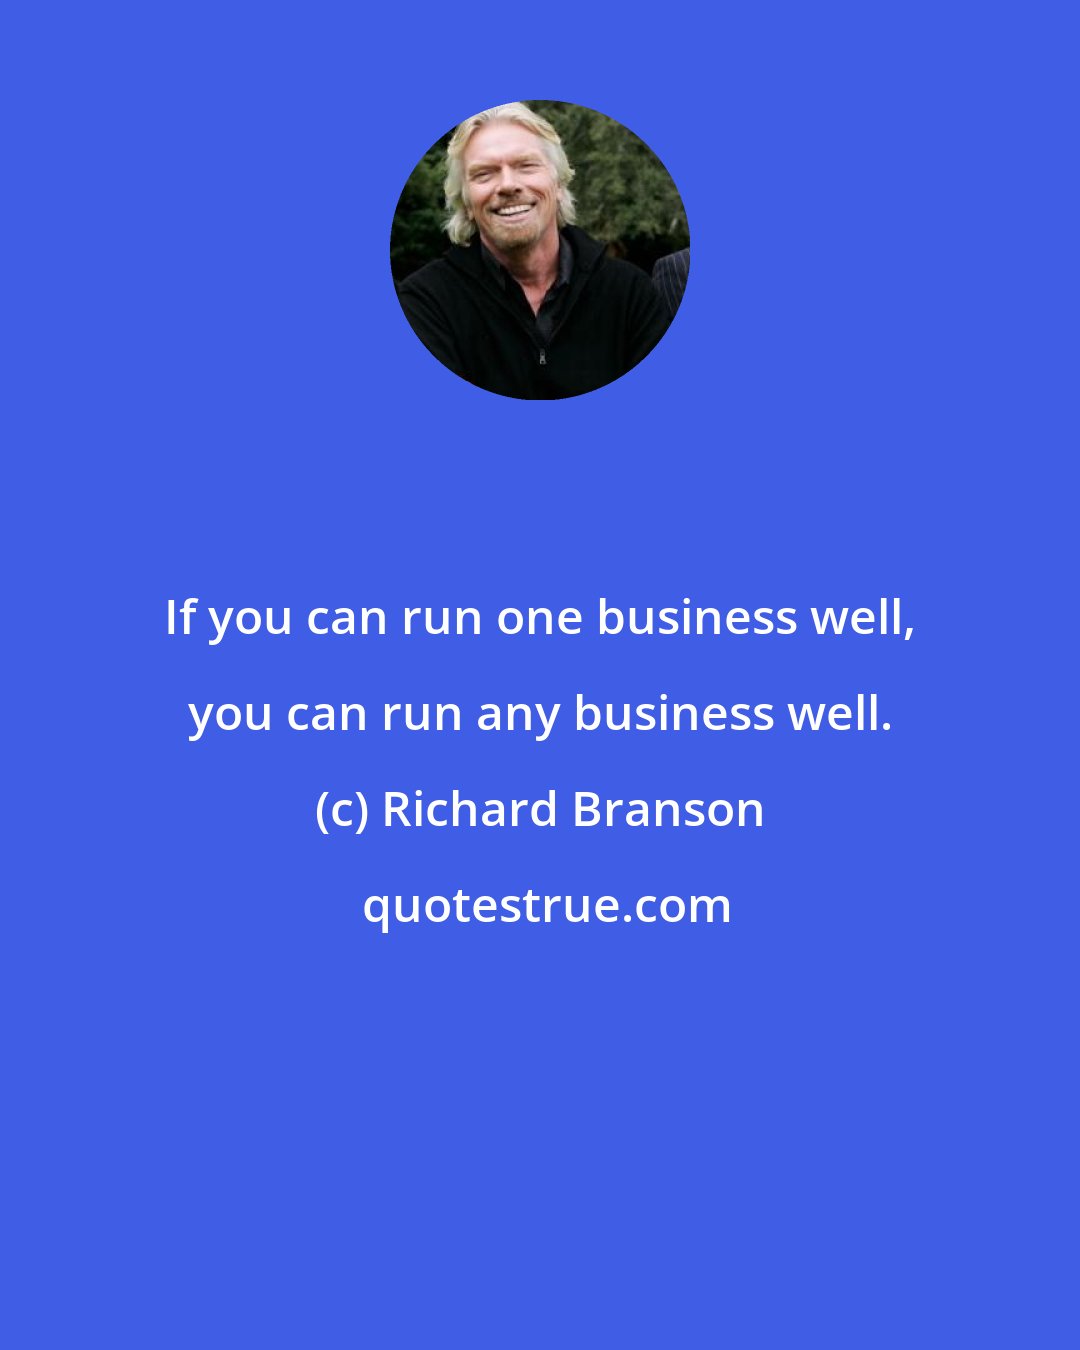 Richard Branson: If you can run one business well, you can run any business well.